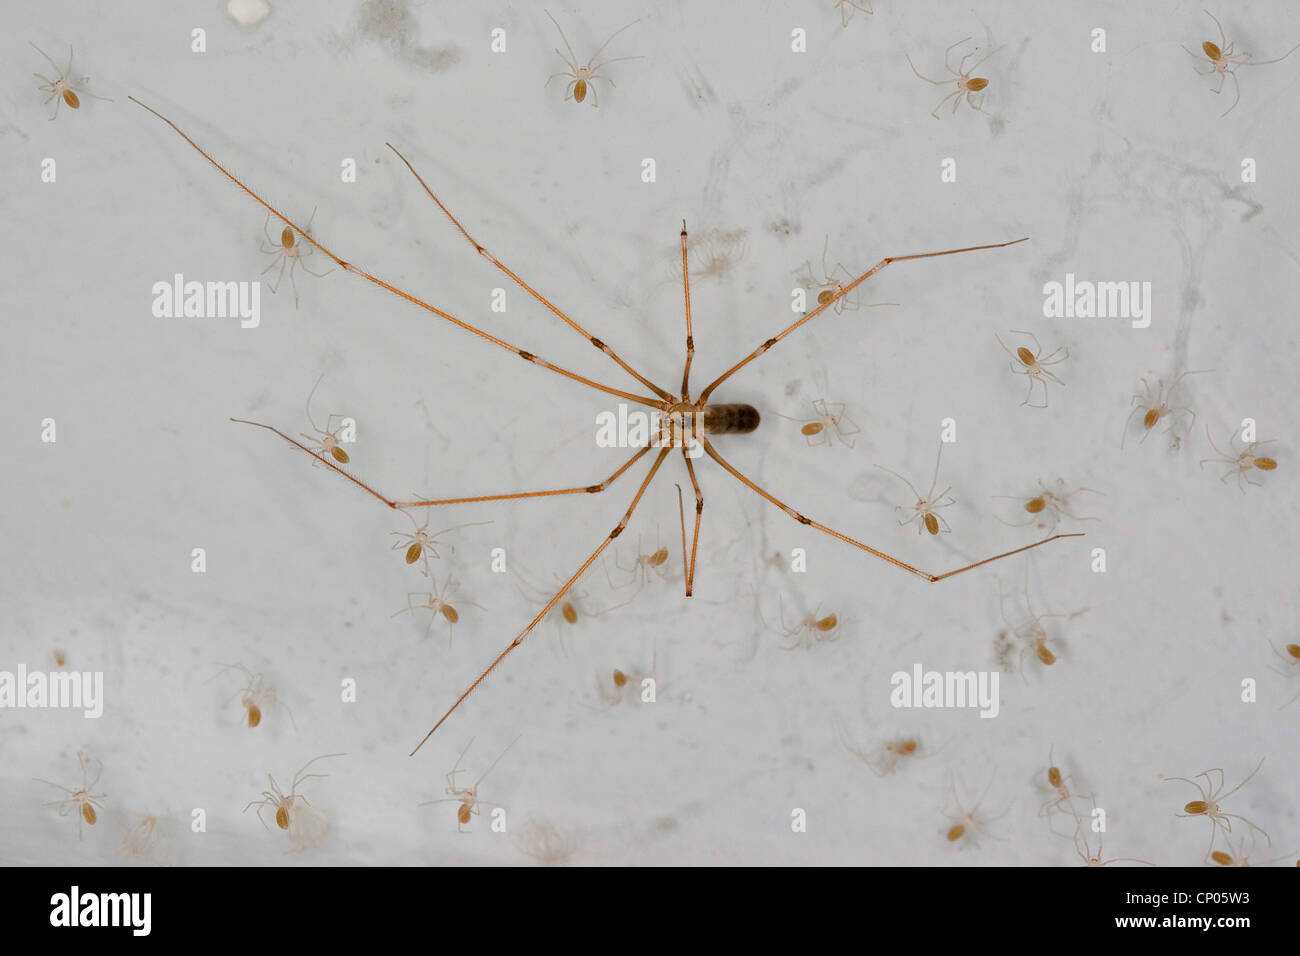 Long-bodied cellar spider, Longbodied cellar spider (Pholcus phalangioides), female with one day old juveniles in a web at a ceiling, Germany Stock Photo